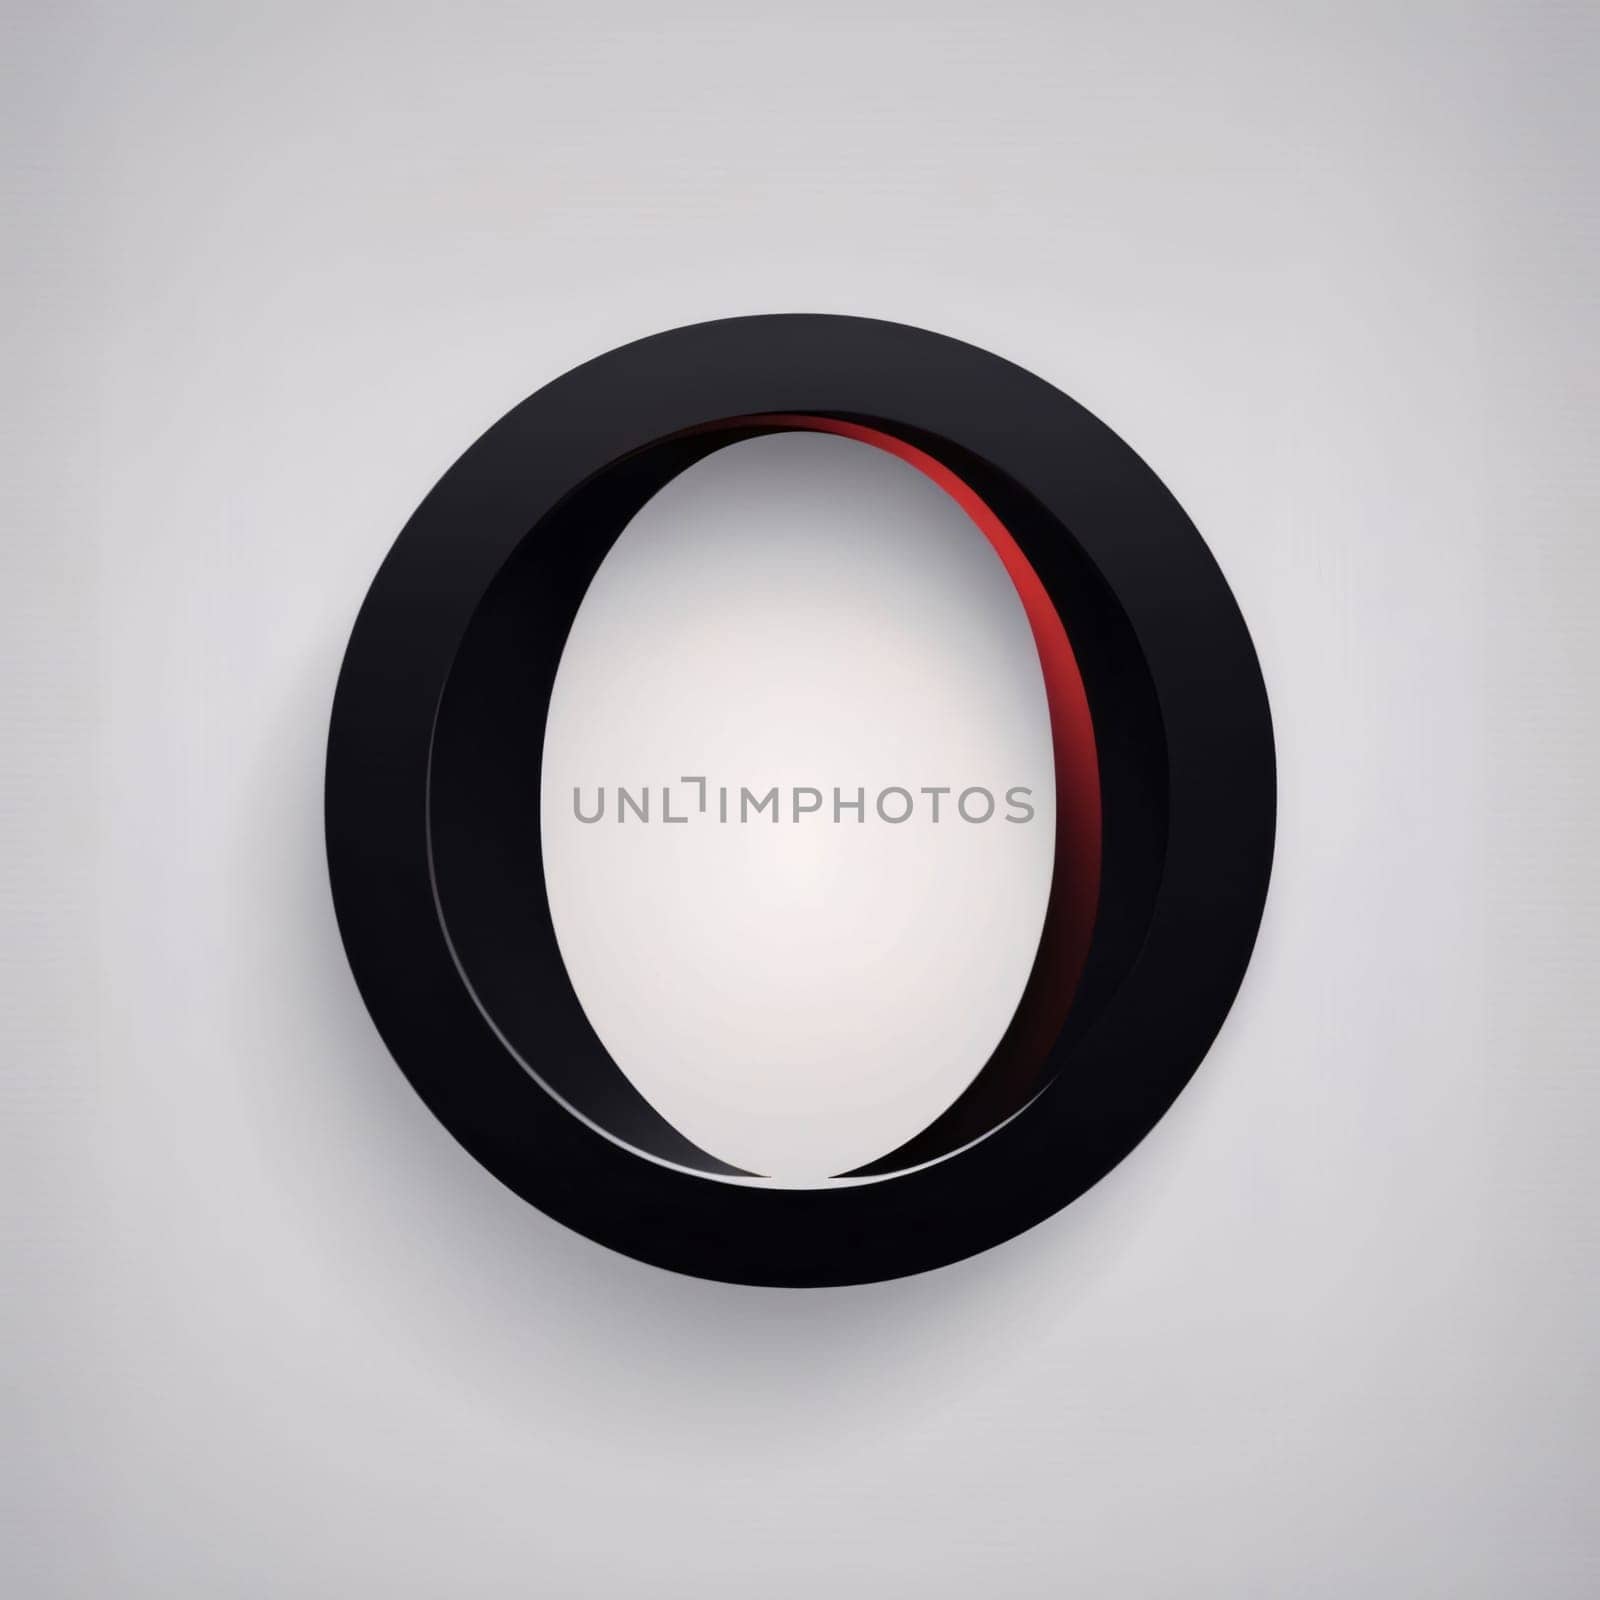 Graphic alphabet letters: Abstract 3D black and red ring on white background. Vector illustration.